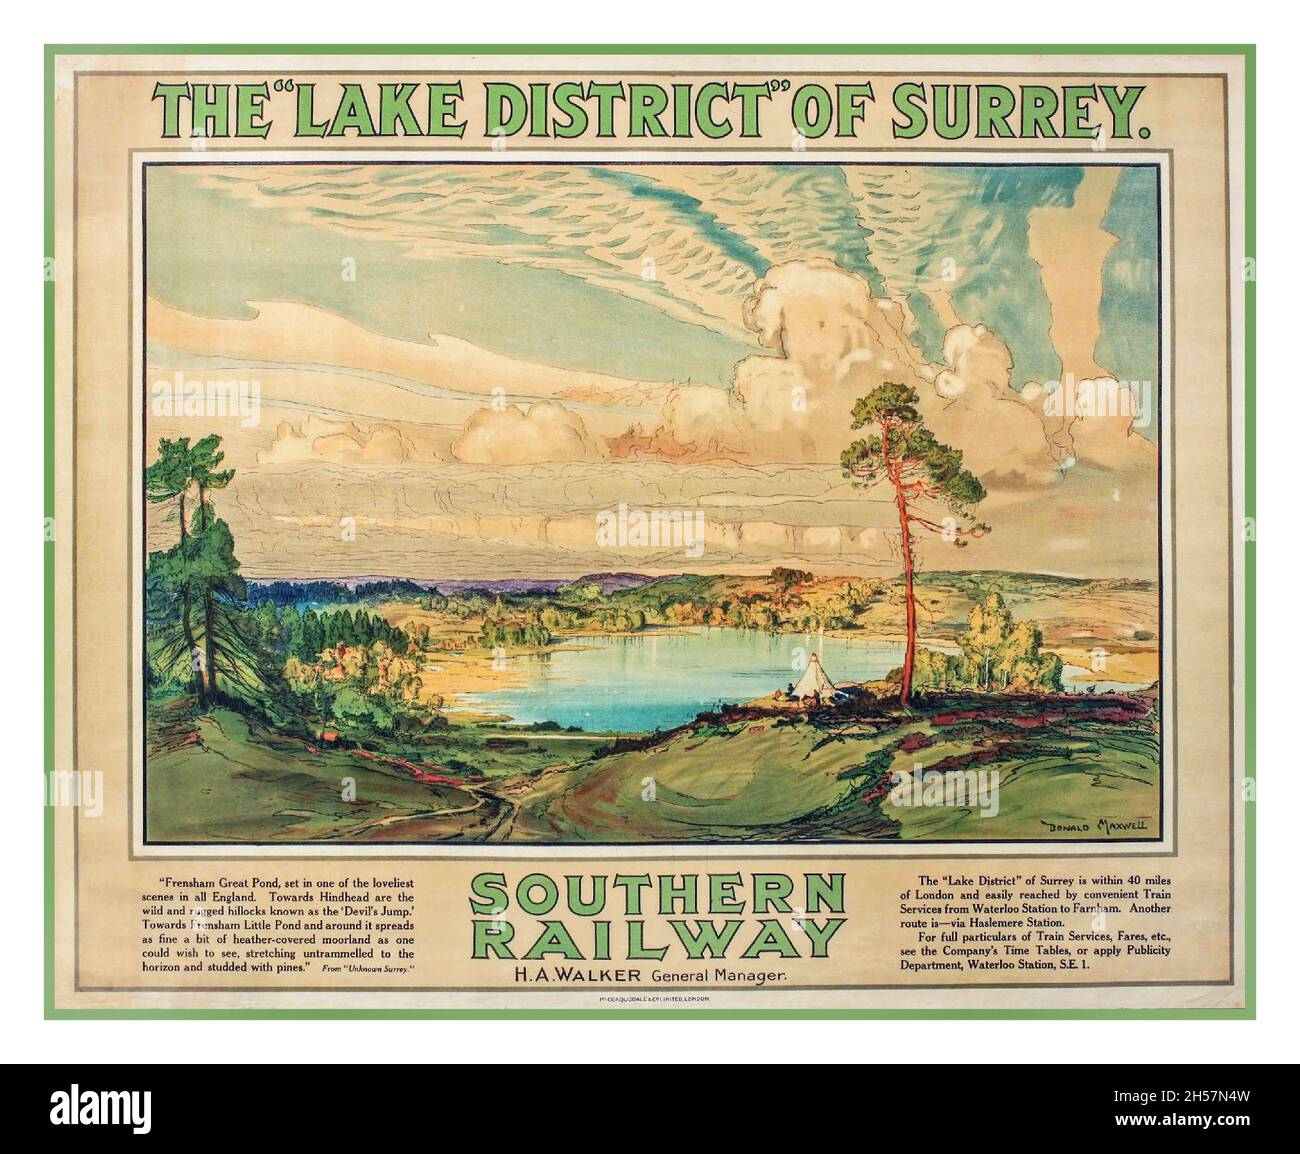 Vintage Travel Southern Railway Poster 1900s 'The Lake District Of Surrey’ by Donald Maxwell 1920 featuring Frensham Great Pond Britain UK Stock Photo